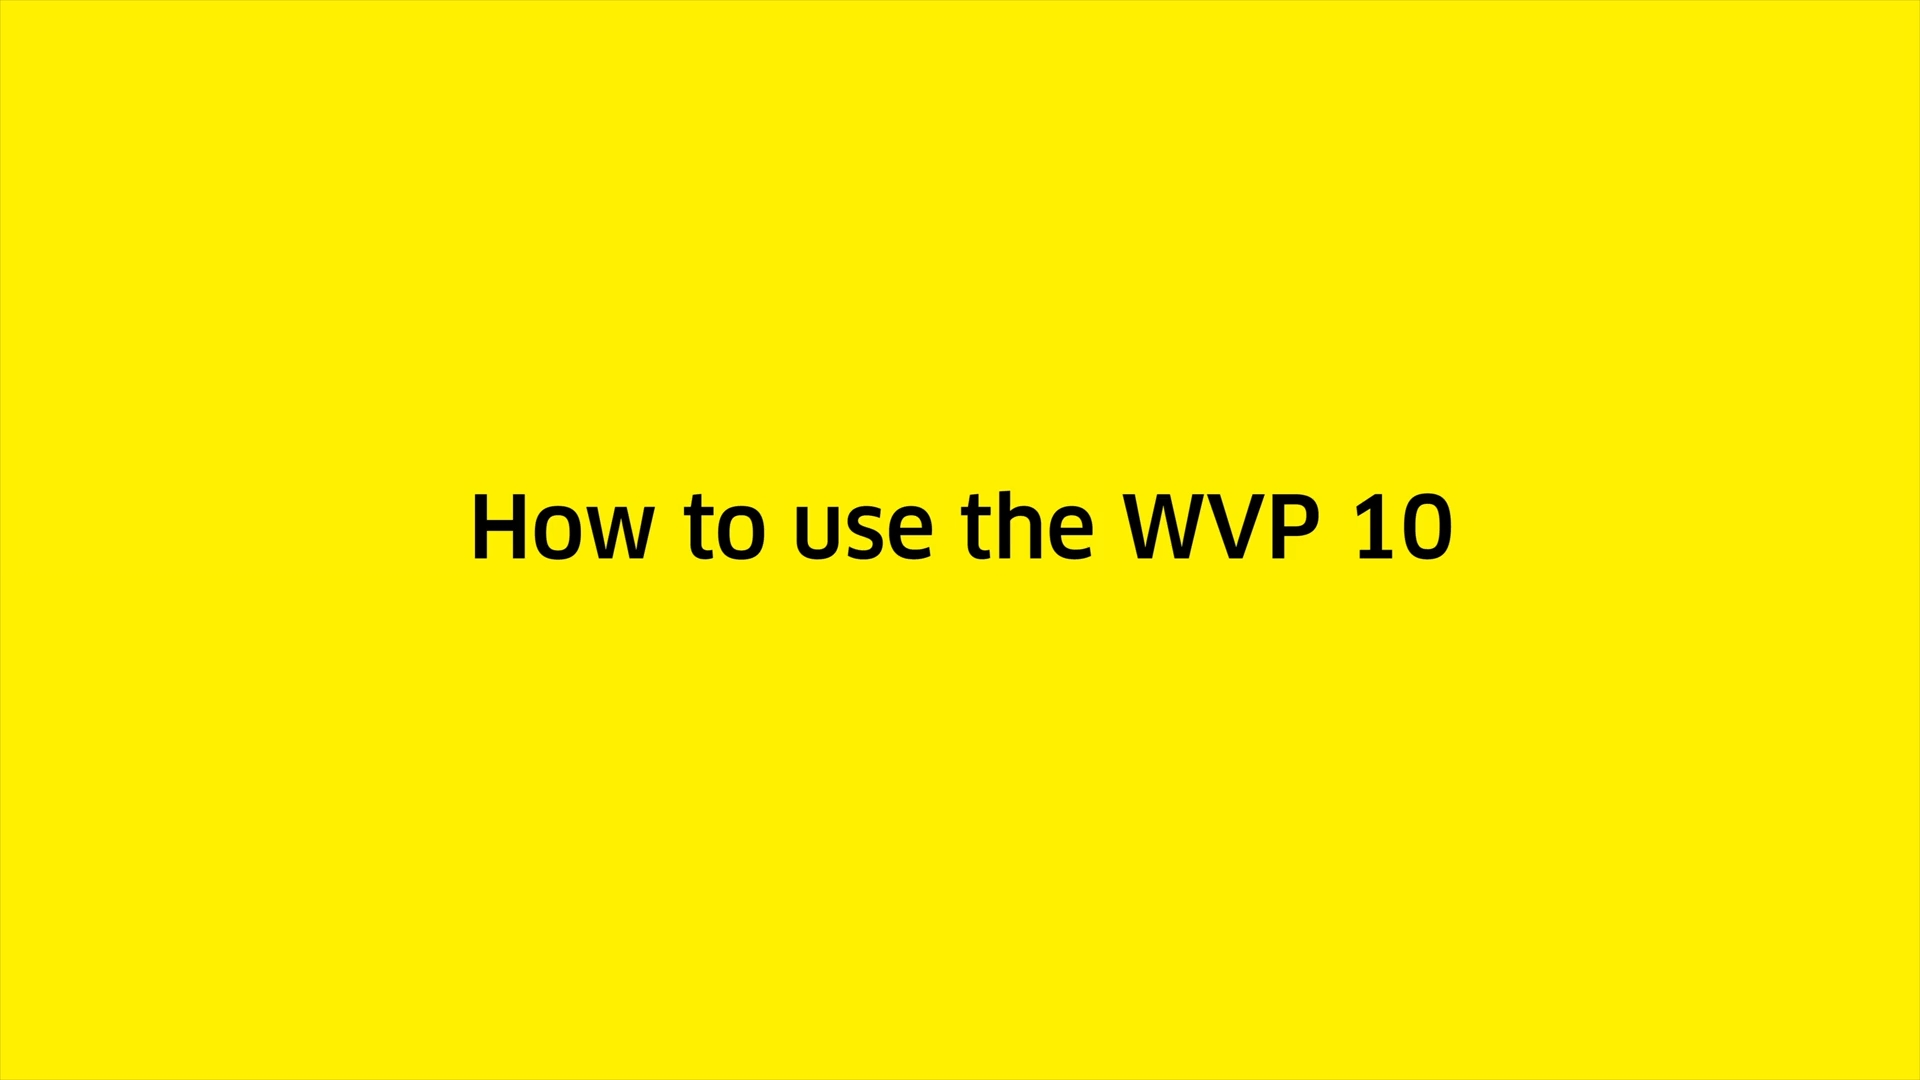 How to use WVP 10